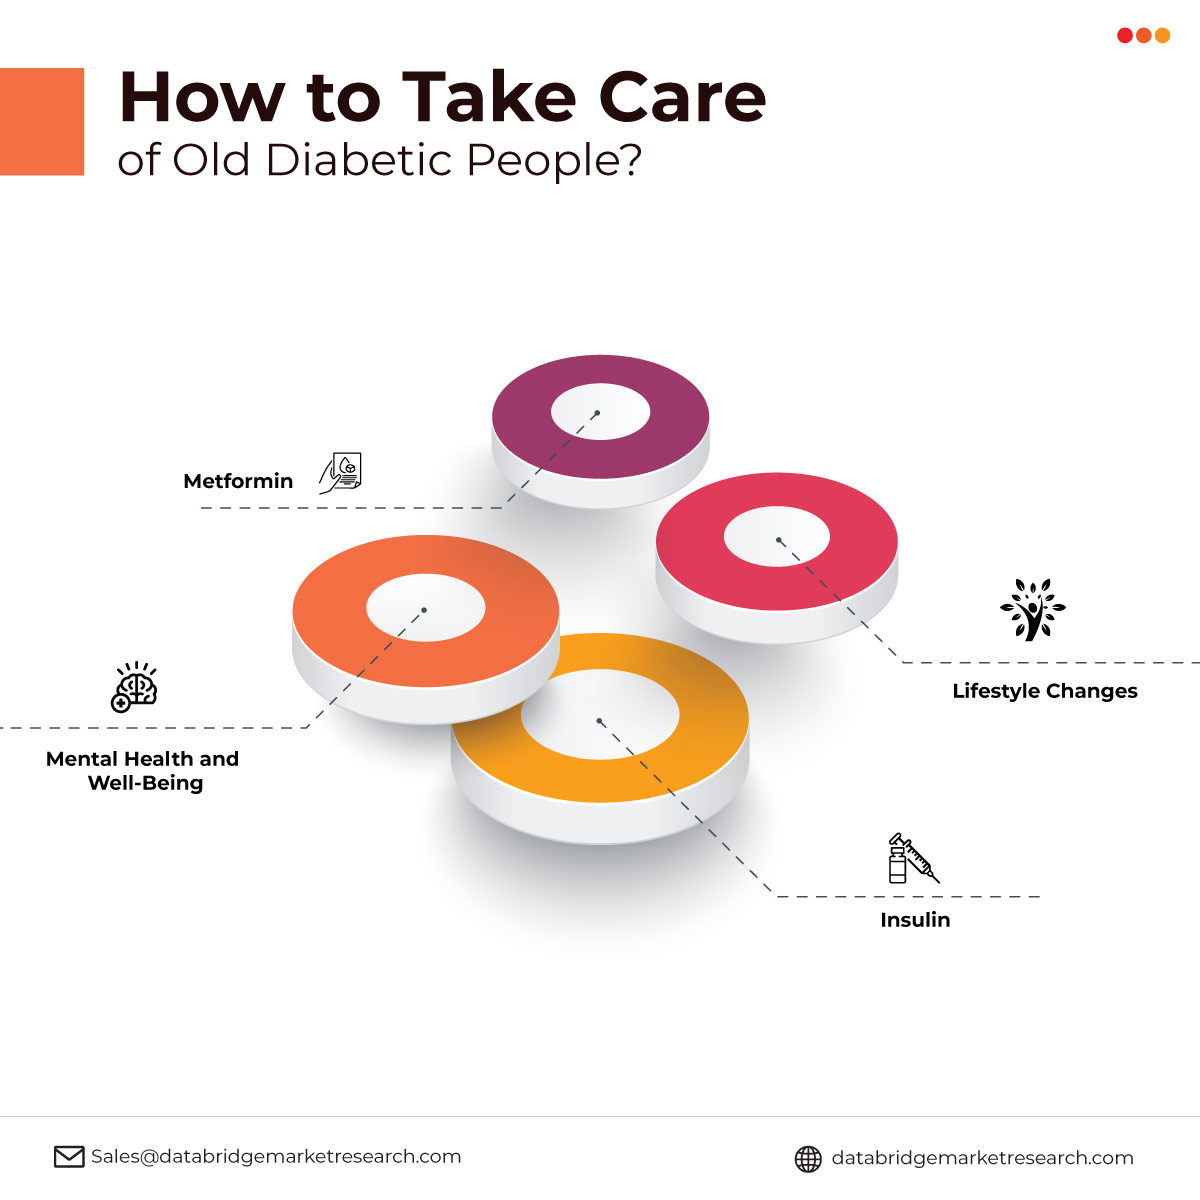 How to Care for Older Adults with Type 2 Diabetes